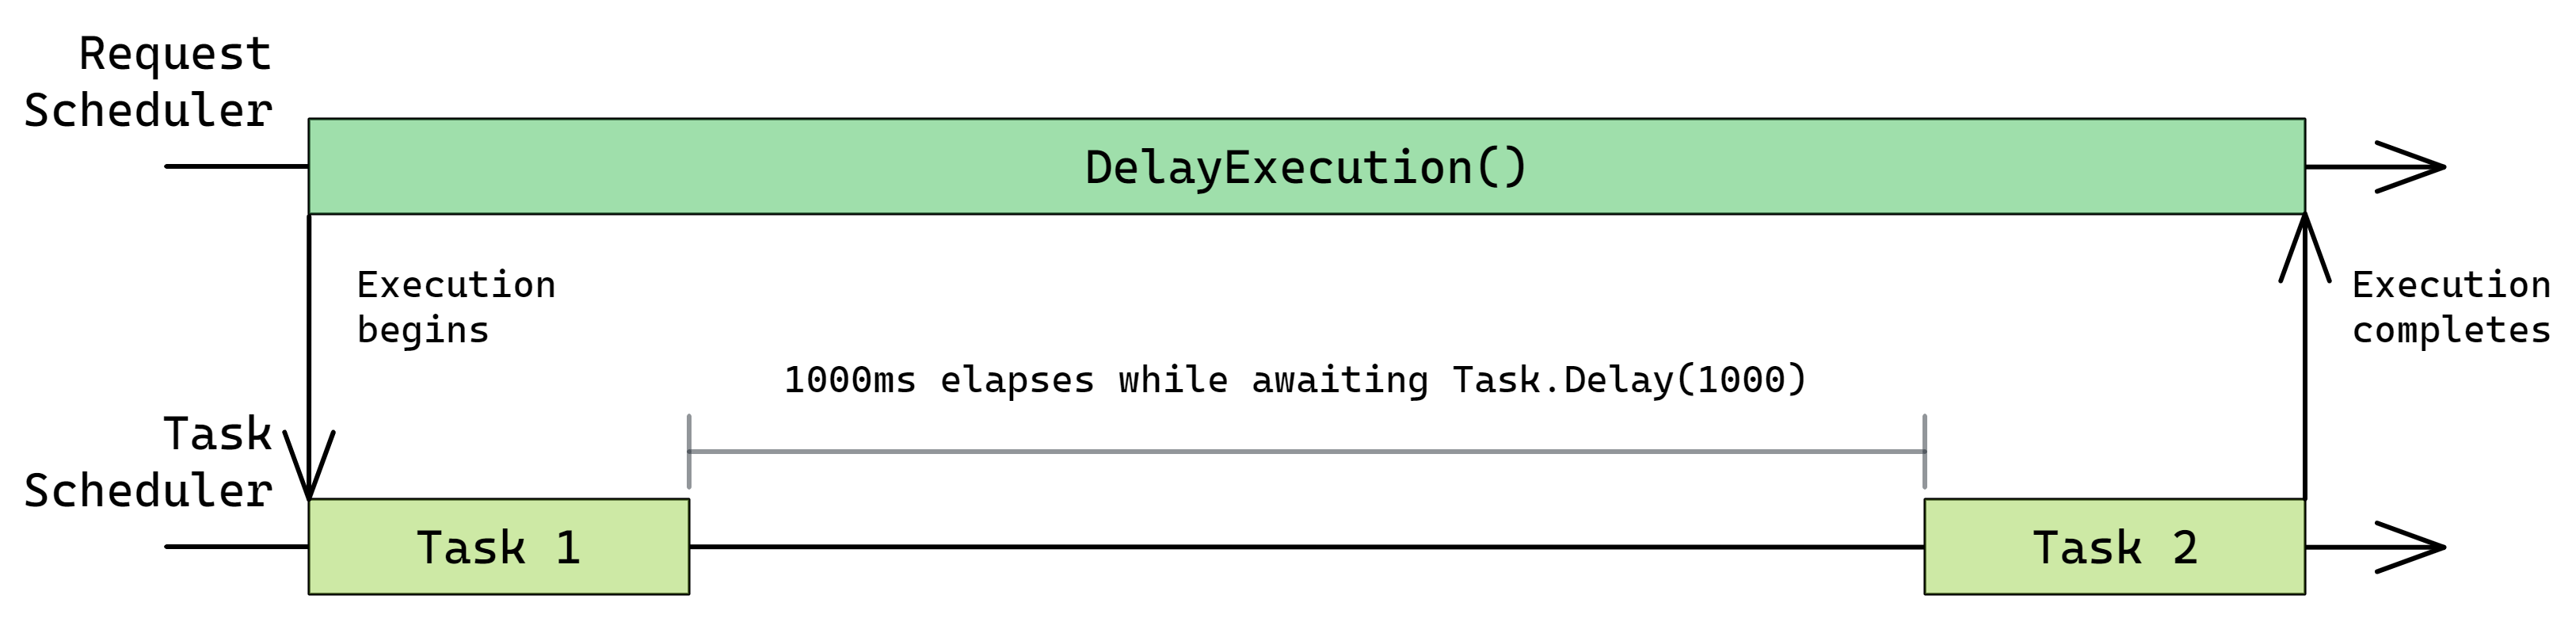 Two-Task-based request execution example.